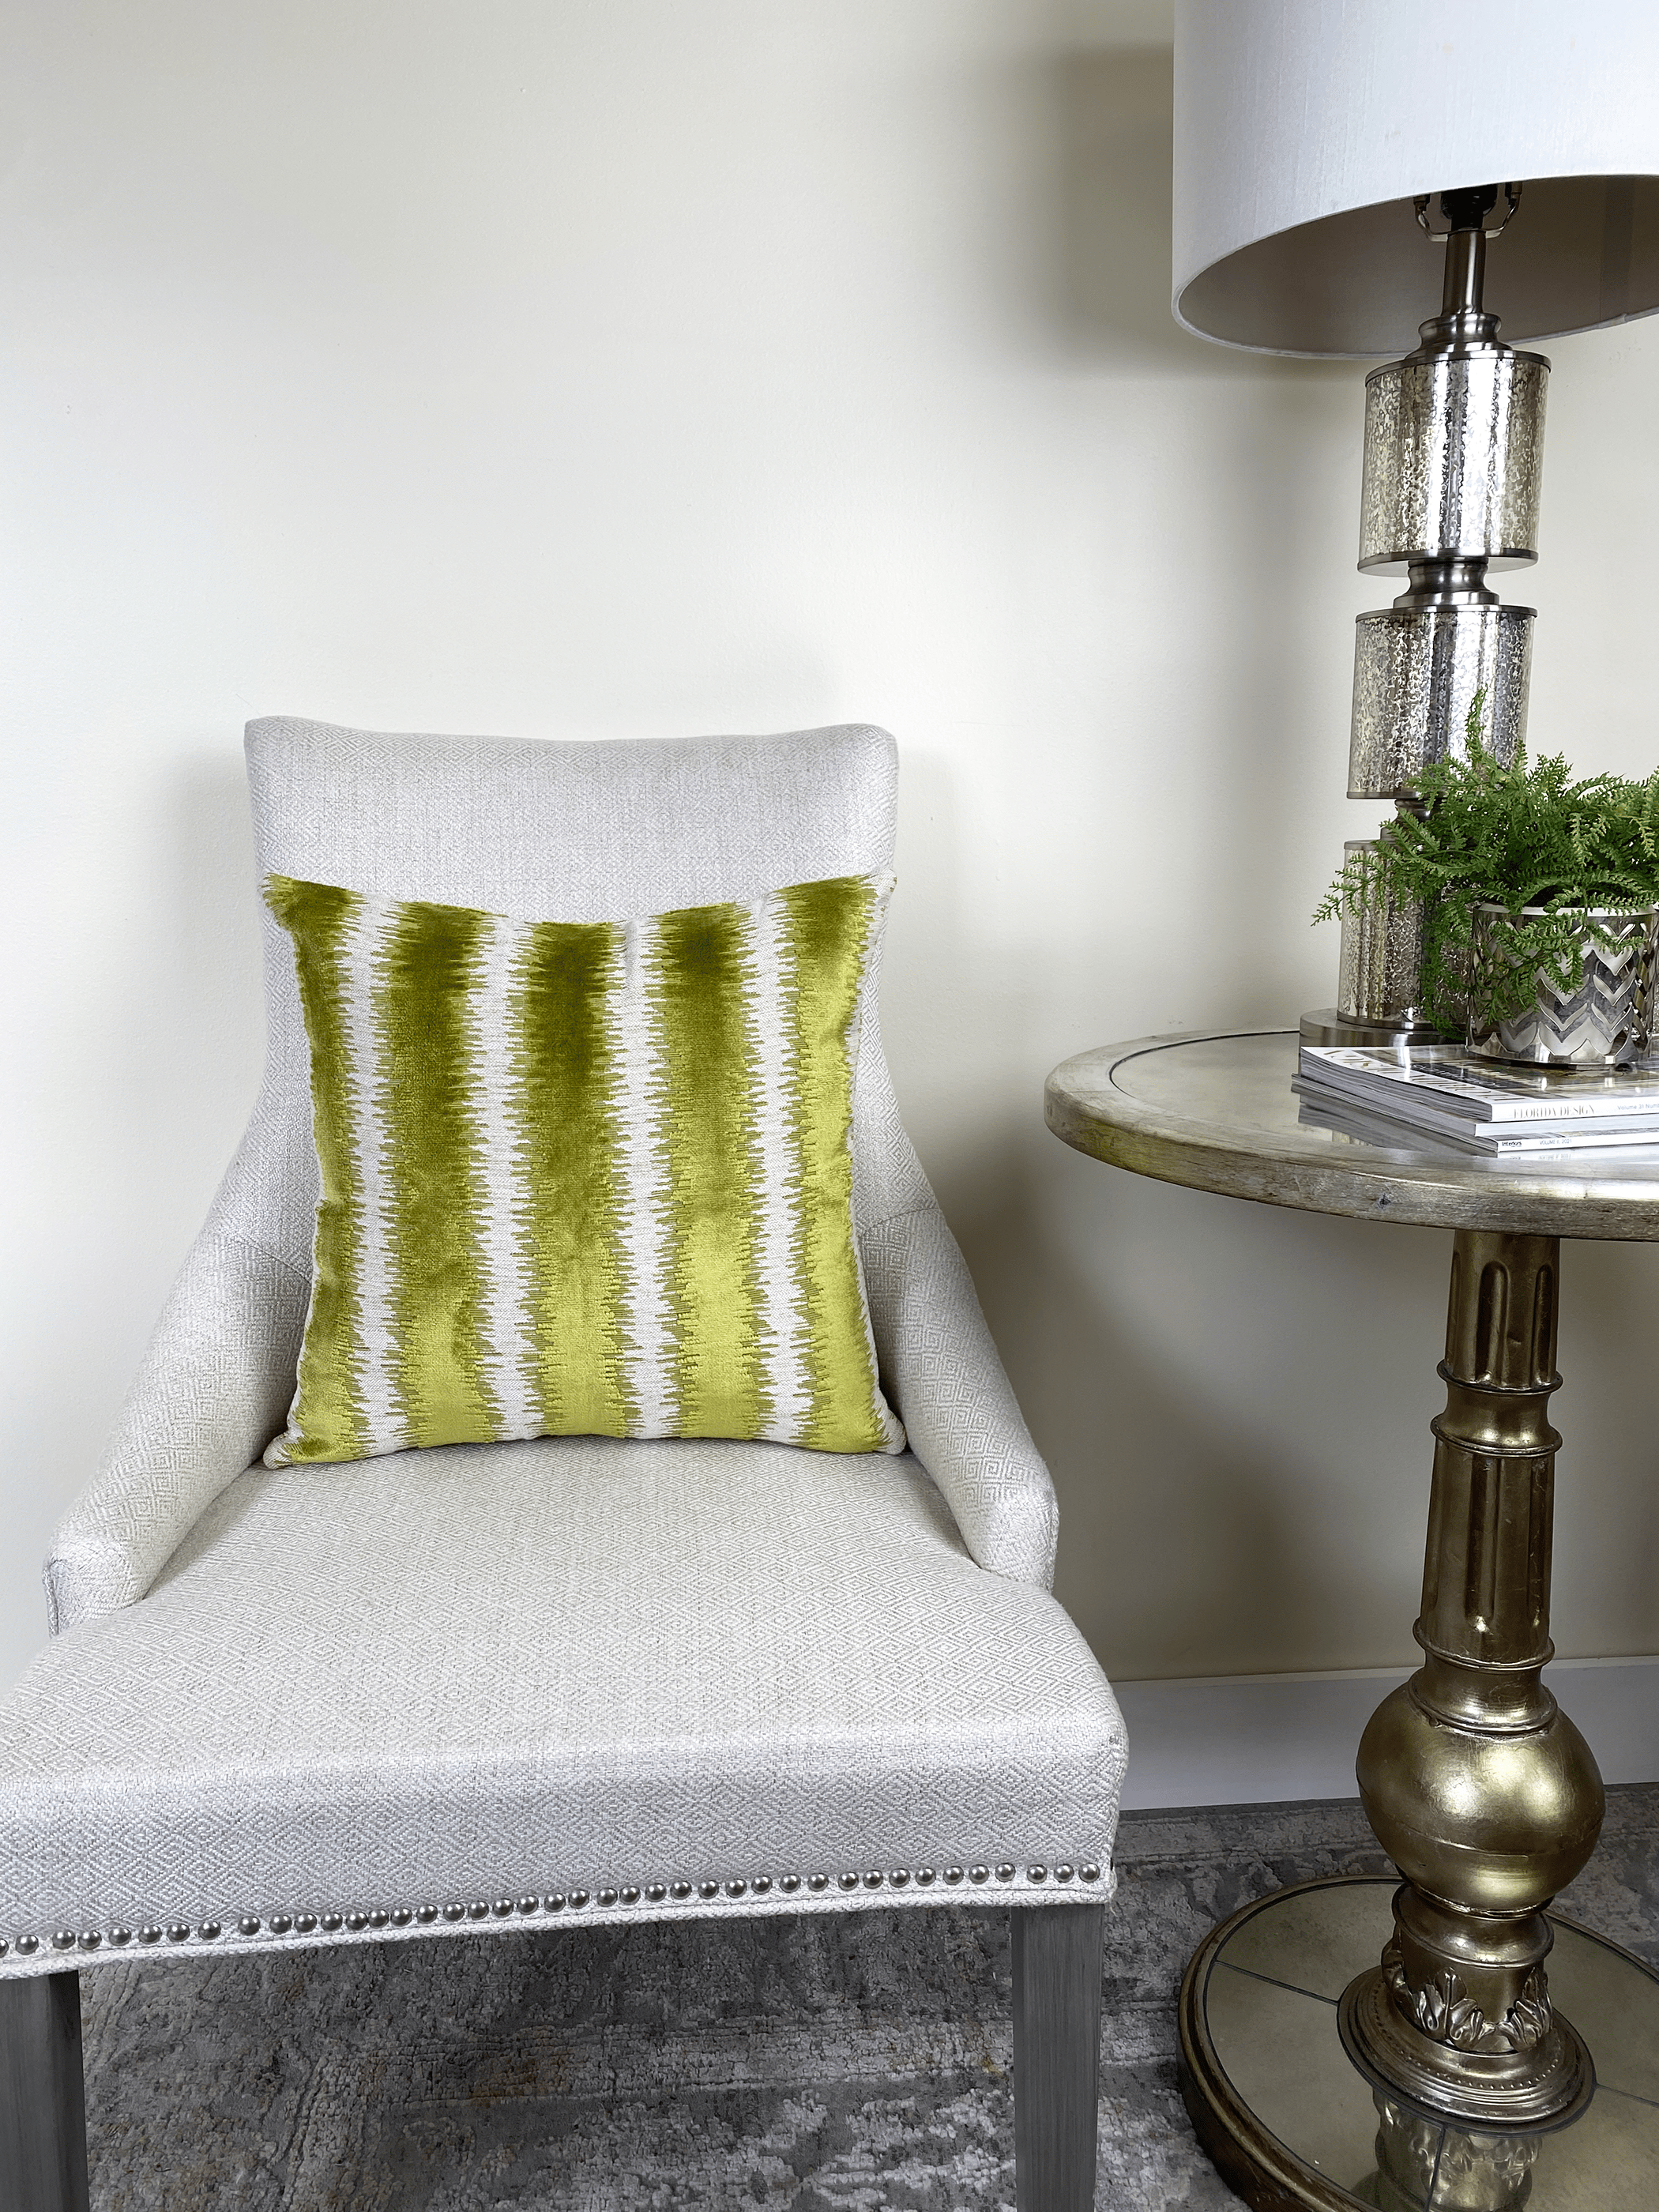 https://smithyhomecouture.com/wp-content/uploads/2021/02/chartreuse-stripe-poly-vs-feather-chair-2.png